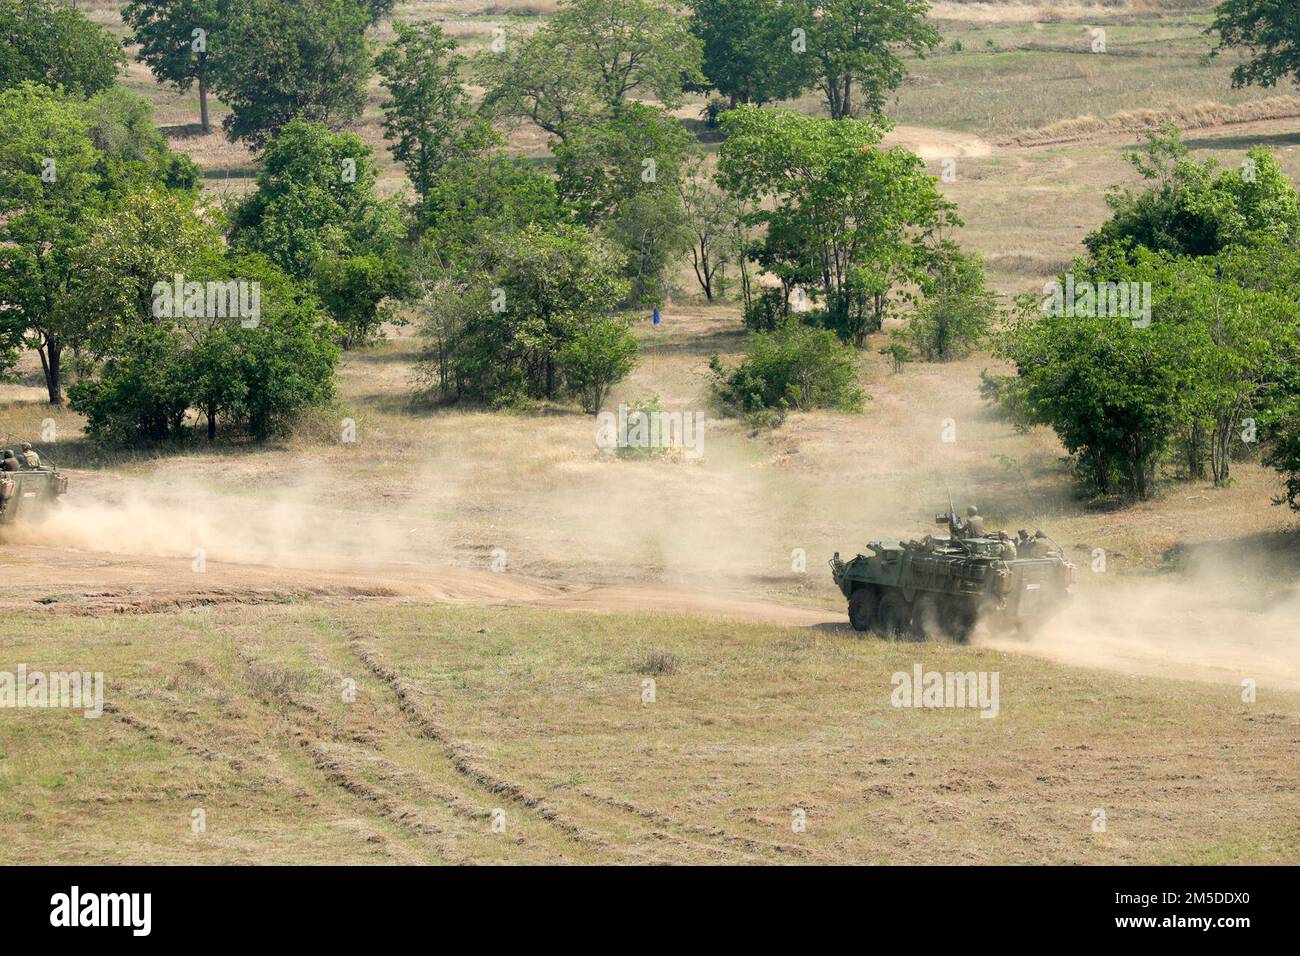 Royal Thai Army soldiers drive out in M1129 Stryker mortar system vehicles during a combined arms live fire exercise as part of Cobra Gold 2022, in the Lopburi Province of the Kingdom of Thailand, Mar. 4, 2022. CG 22 is the 41st iteration of the international training exercise that supports readiness and emphasizes coordination on civic action, humanitarian assistance, and disaster relief. From Feb. 22 through March 4, 2022, this annual event taking place at various locations throughout the Kingdom of Thailand increases the capability, capacity, and interoperability of partnered nations while Stock Photo